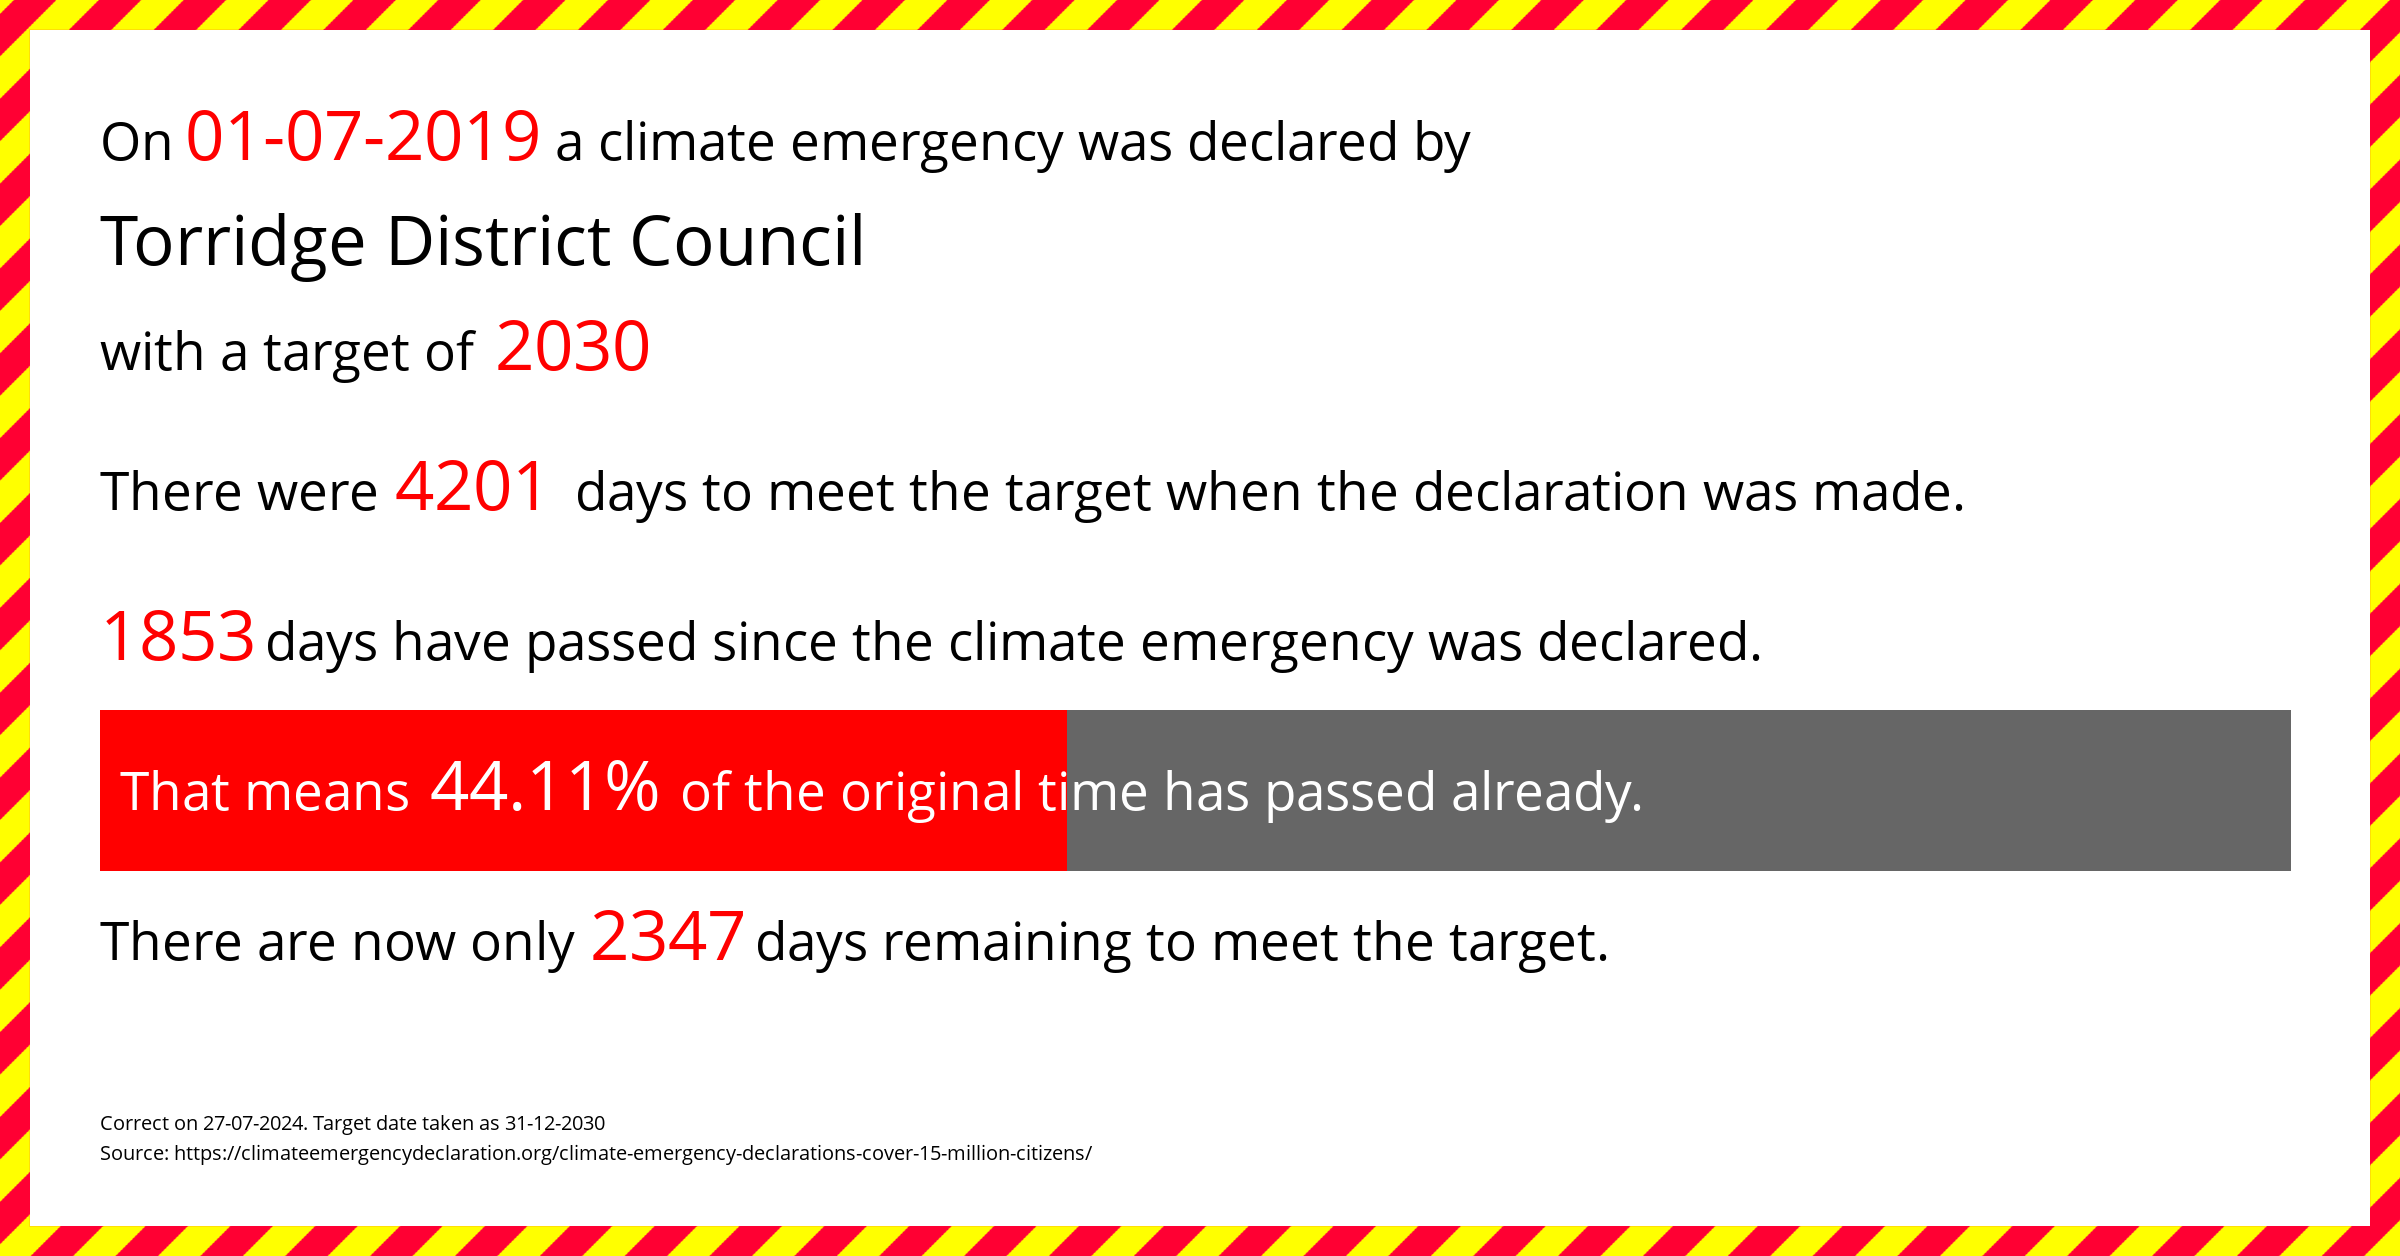 Torridge District Council declared a Climate emergency on Monday 1st July 2019, with a target of 2030.